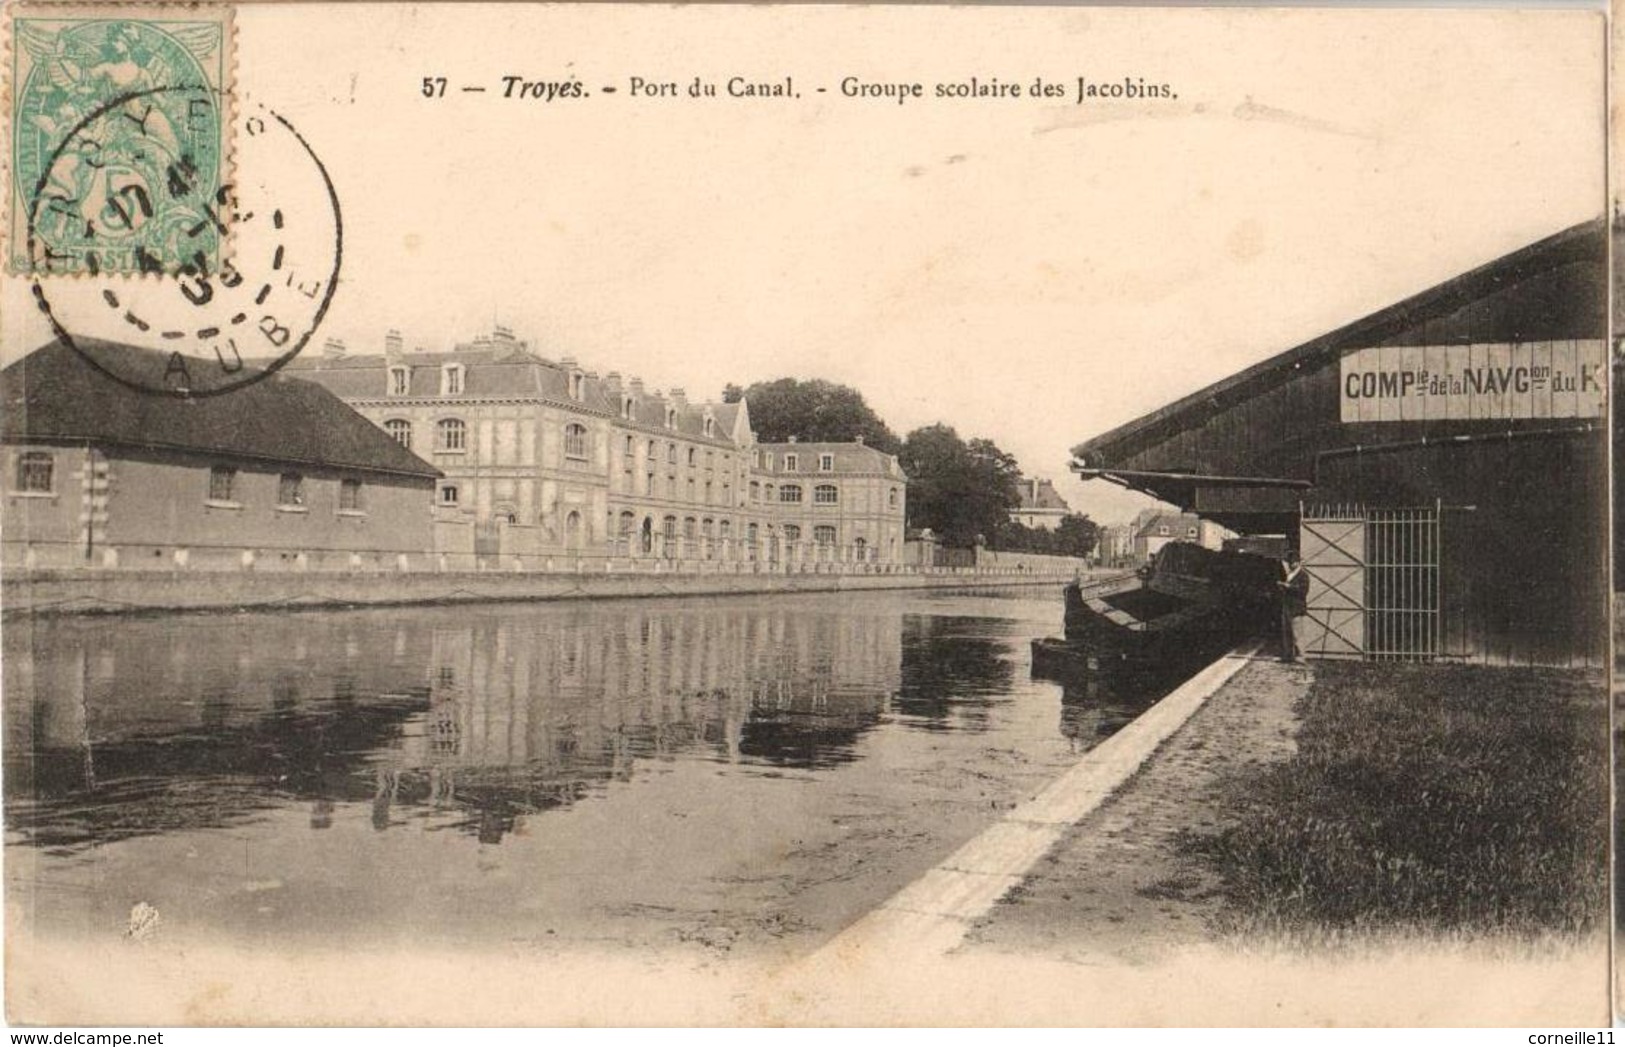 10 - TROYES - PORT DU CANAL - GROUPE SCOLAIRE DES JACOBINS - Troyes